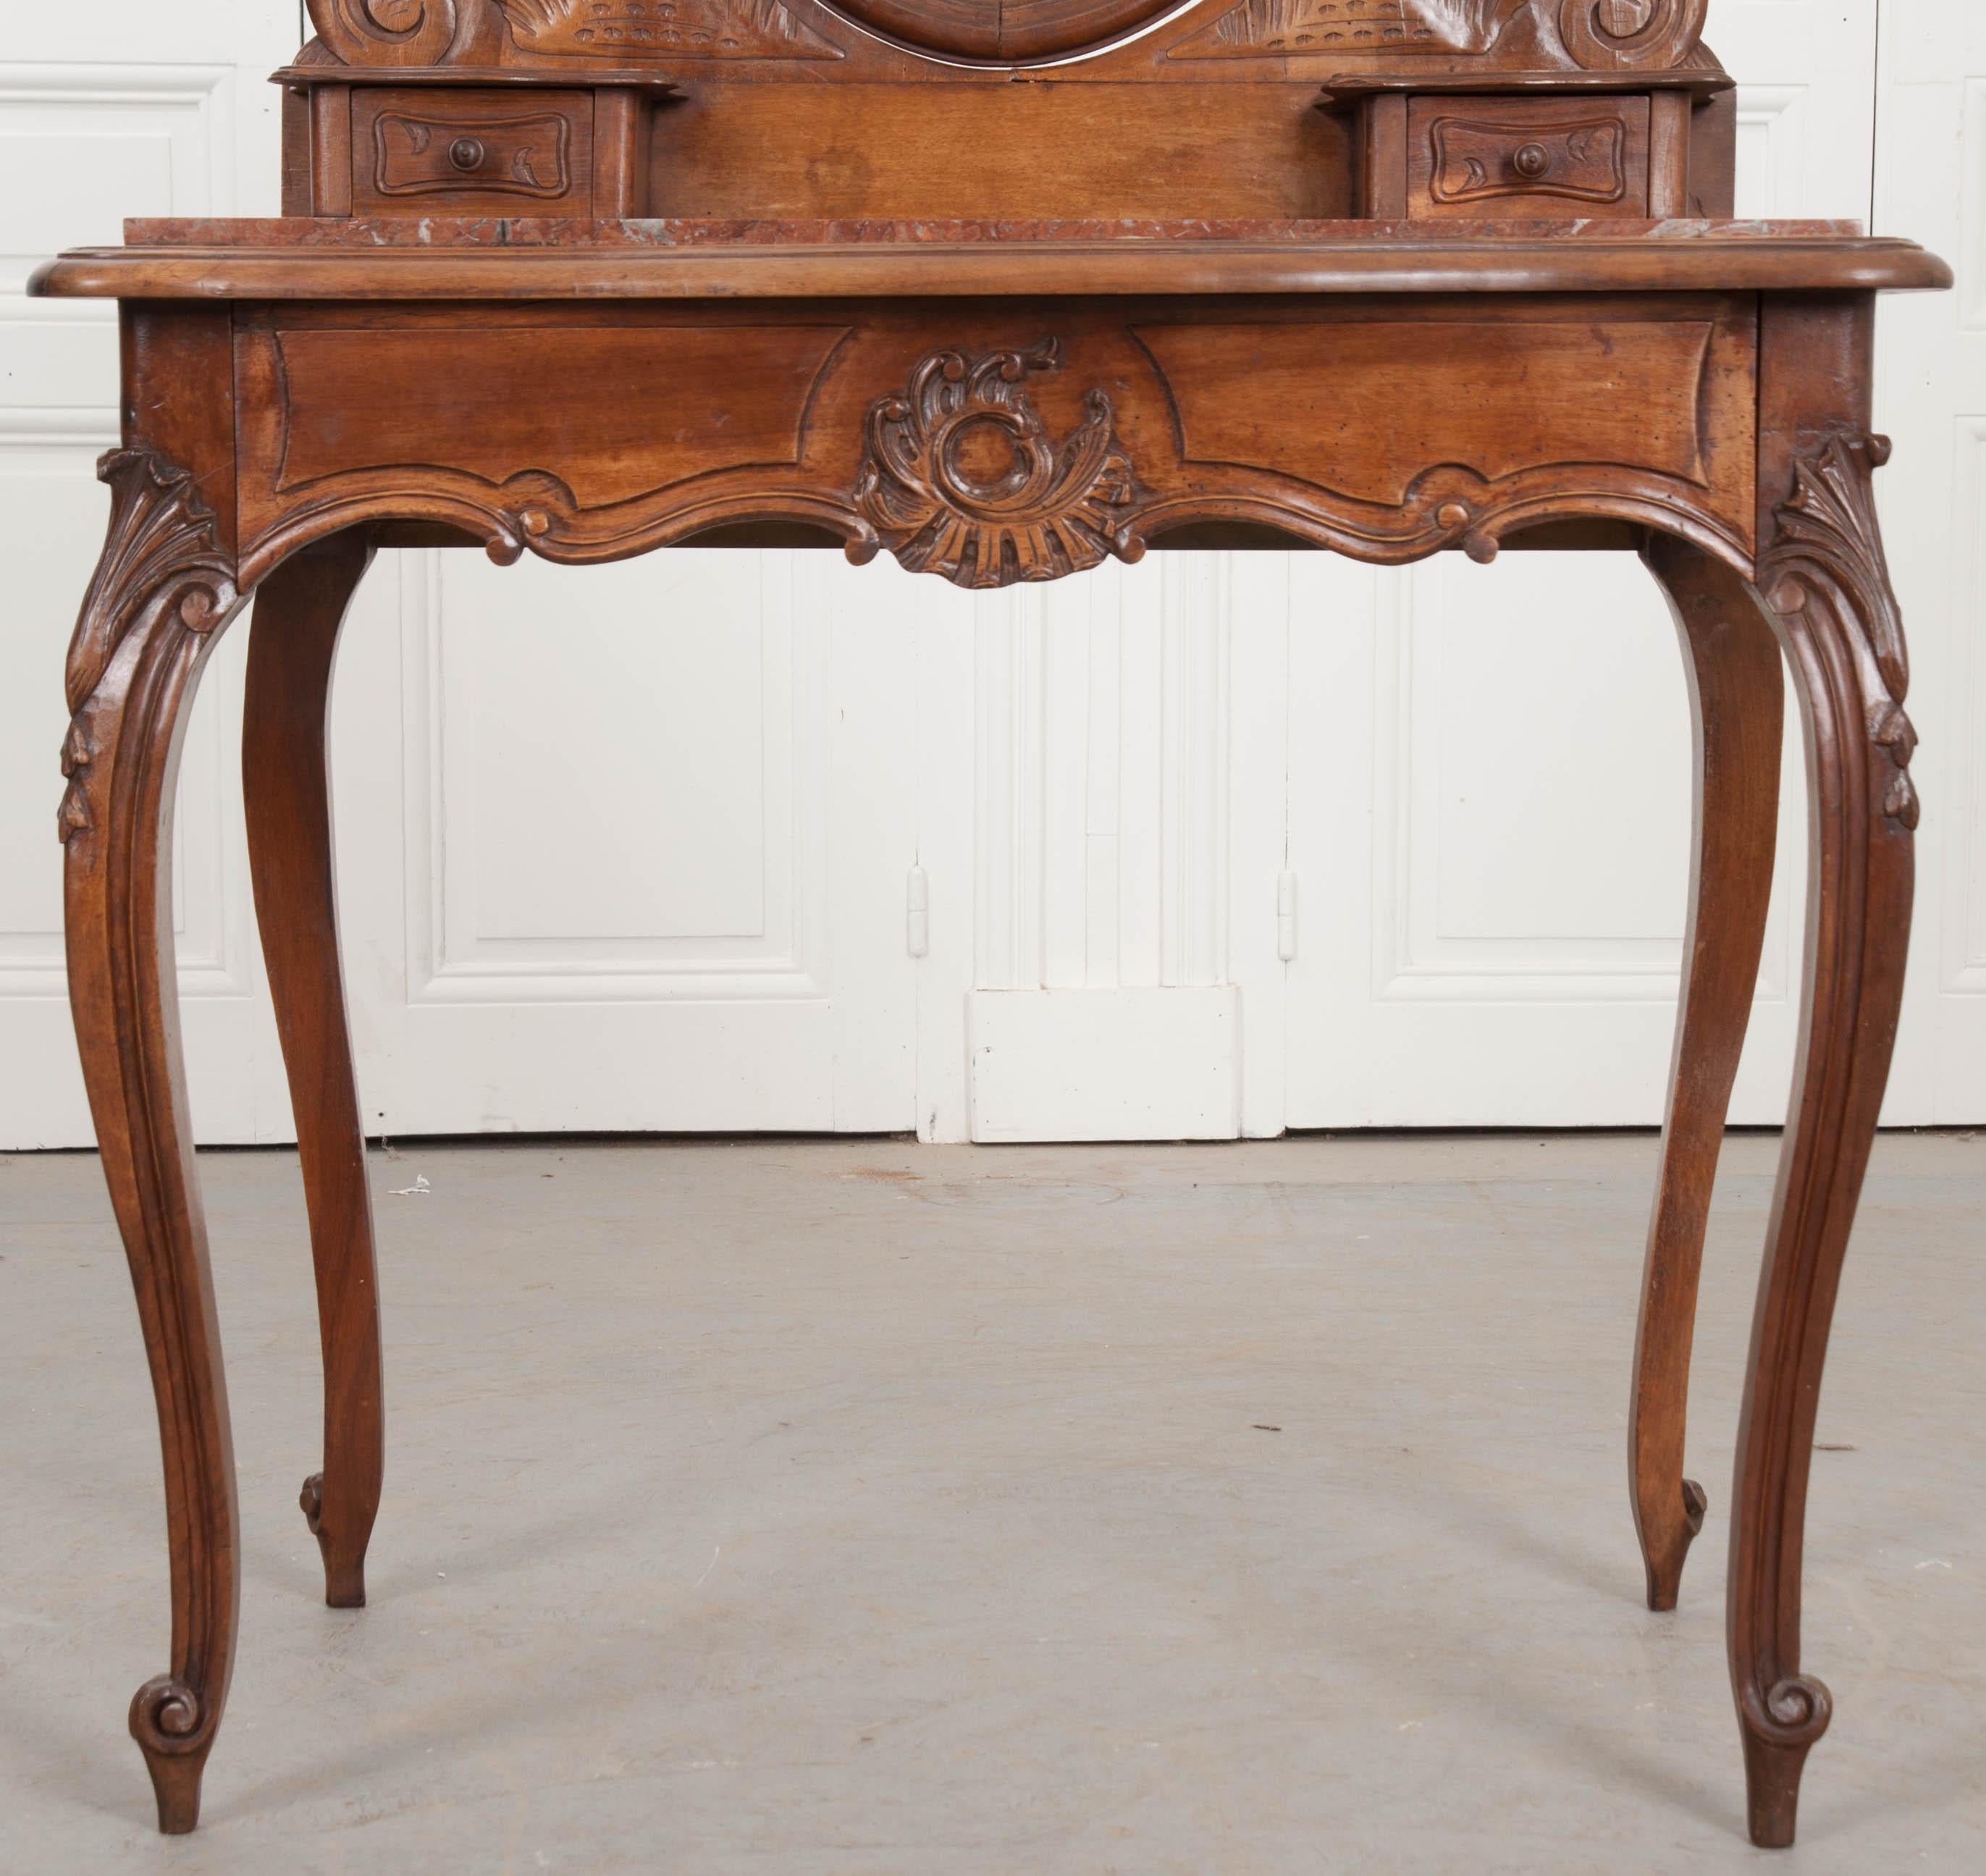 An expertly carved walnut vanity, done in the Louis XV style, circa 1890. The dressing table features a tilting mirror, three-drawers, and an inset marble top. The marble top is red in color, with black, gray and white veins running throughout. The